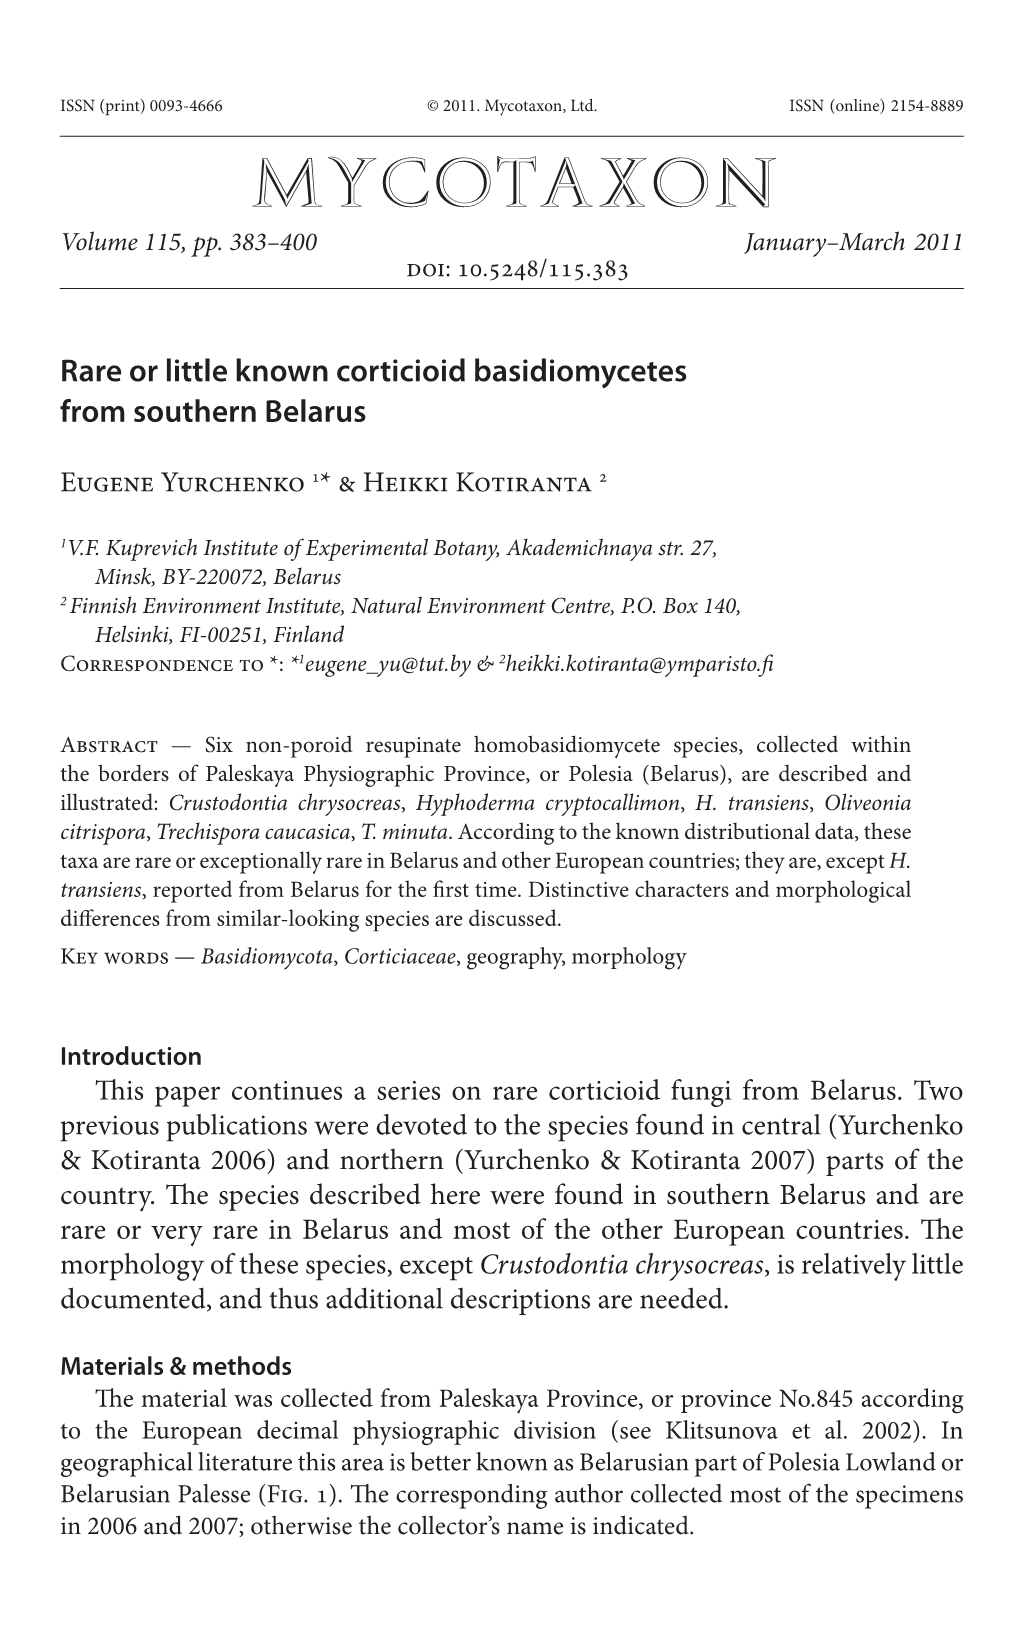 Rare Or Little Known Corticioid Basidiomycetes from Southern Belarus